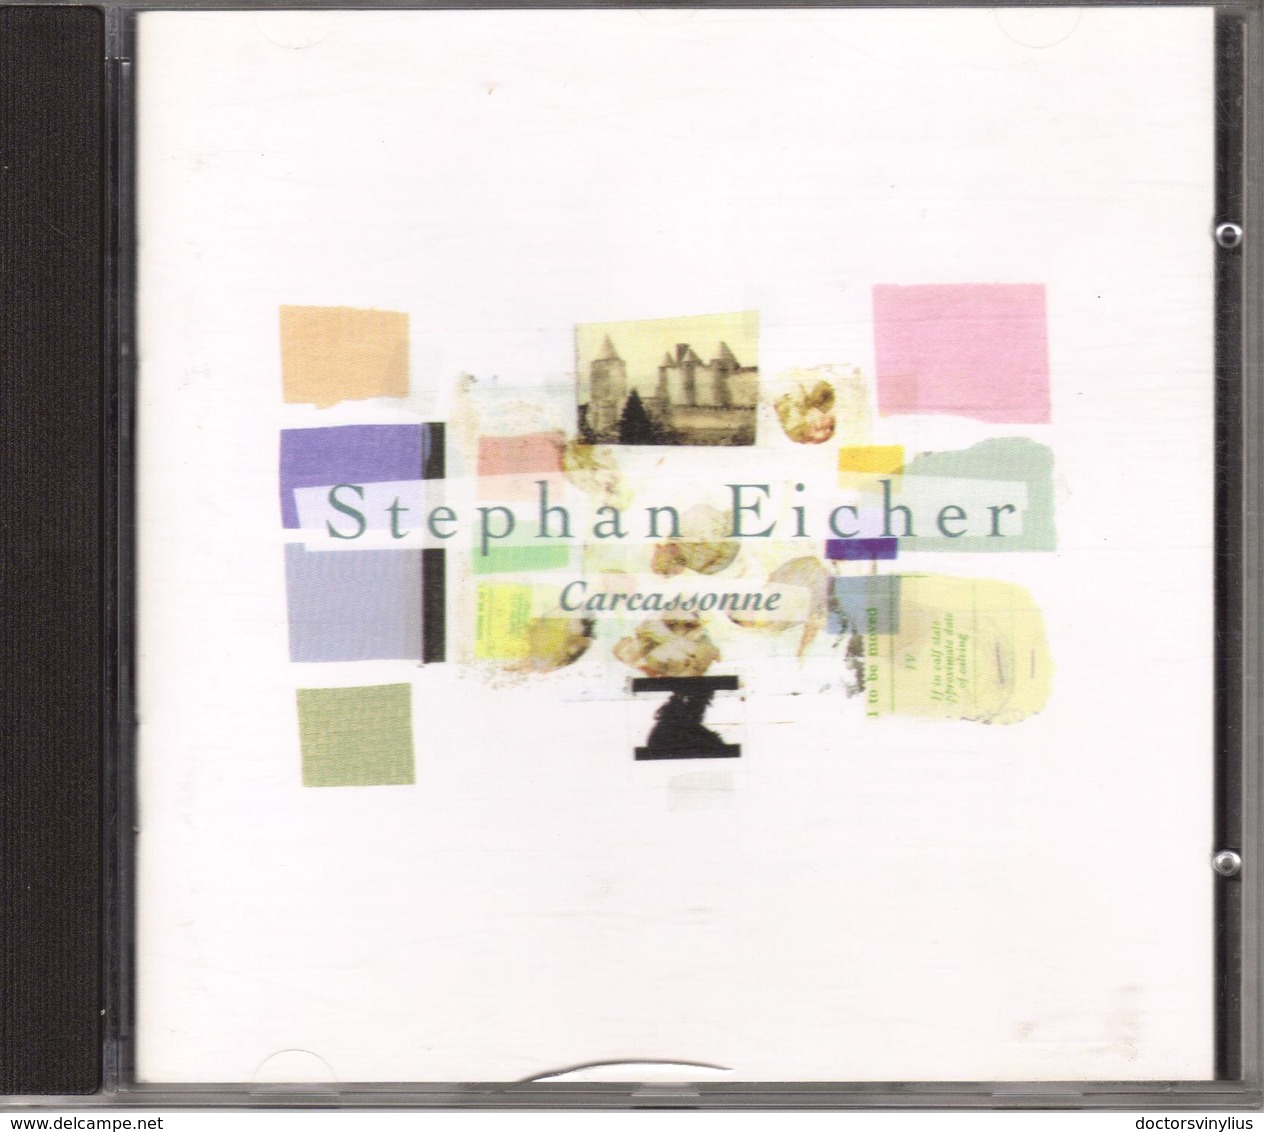 STEPHAN EICHER "CARCASSONNE" 1993 - Other - French Music